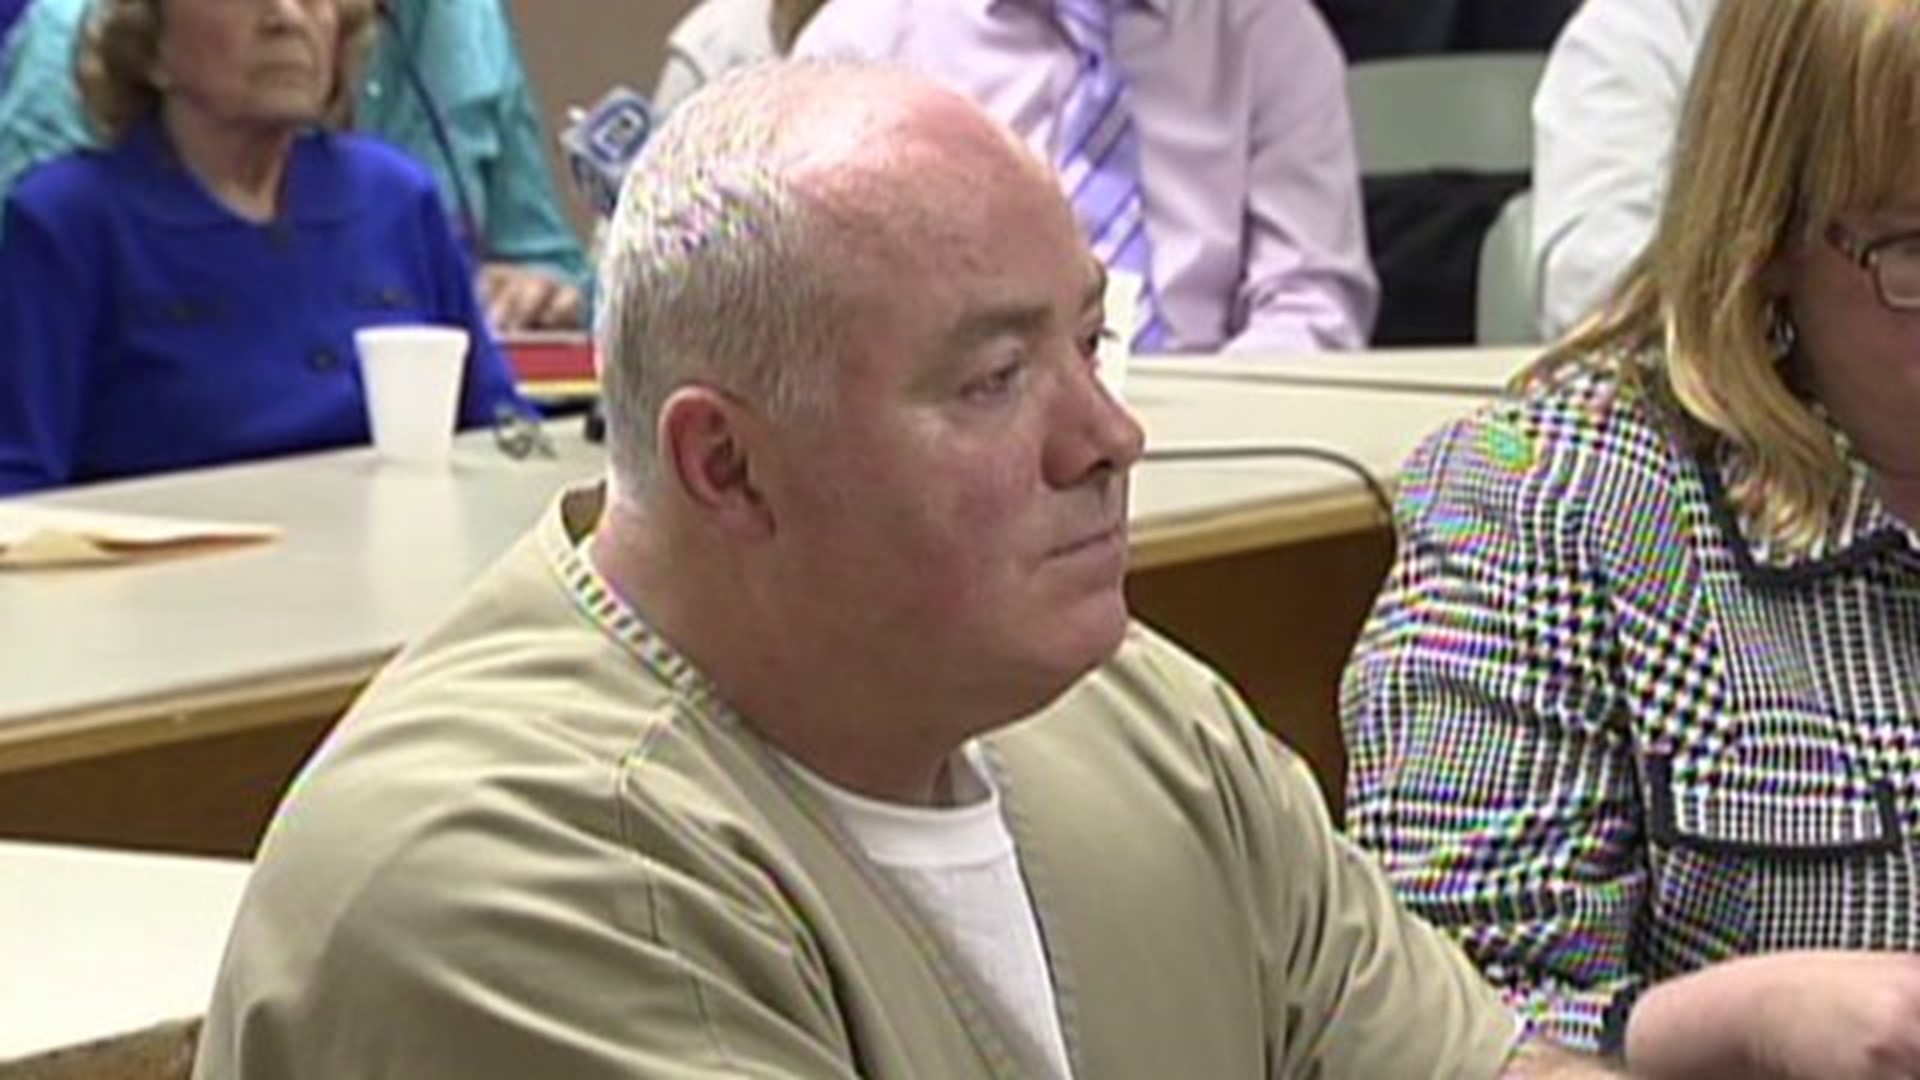 Court upholds Skakel conviction, says lawyer representation was adequate